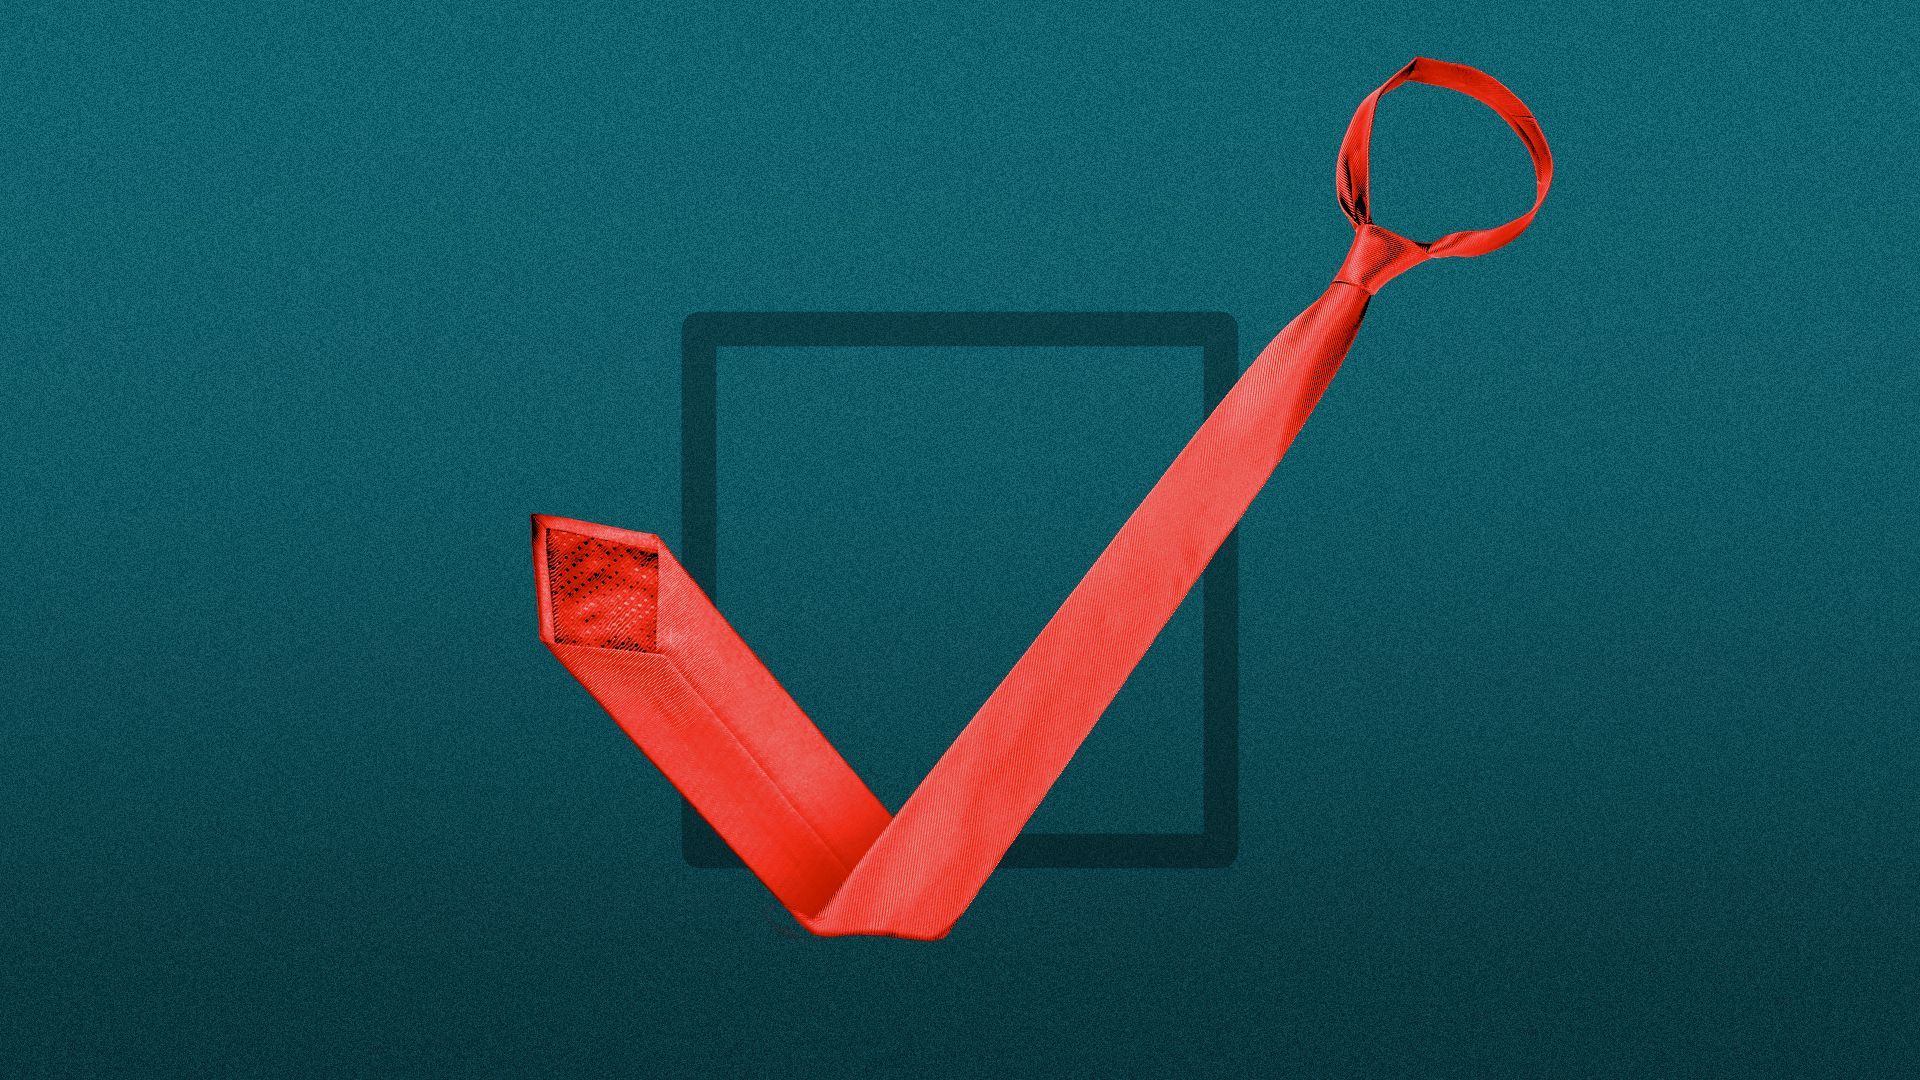 Illustration of a long, red necktie folded into the shape of a checkmark.